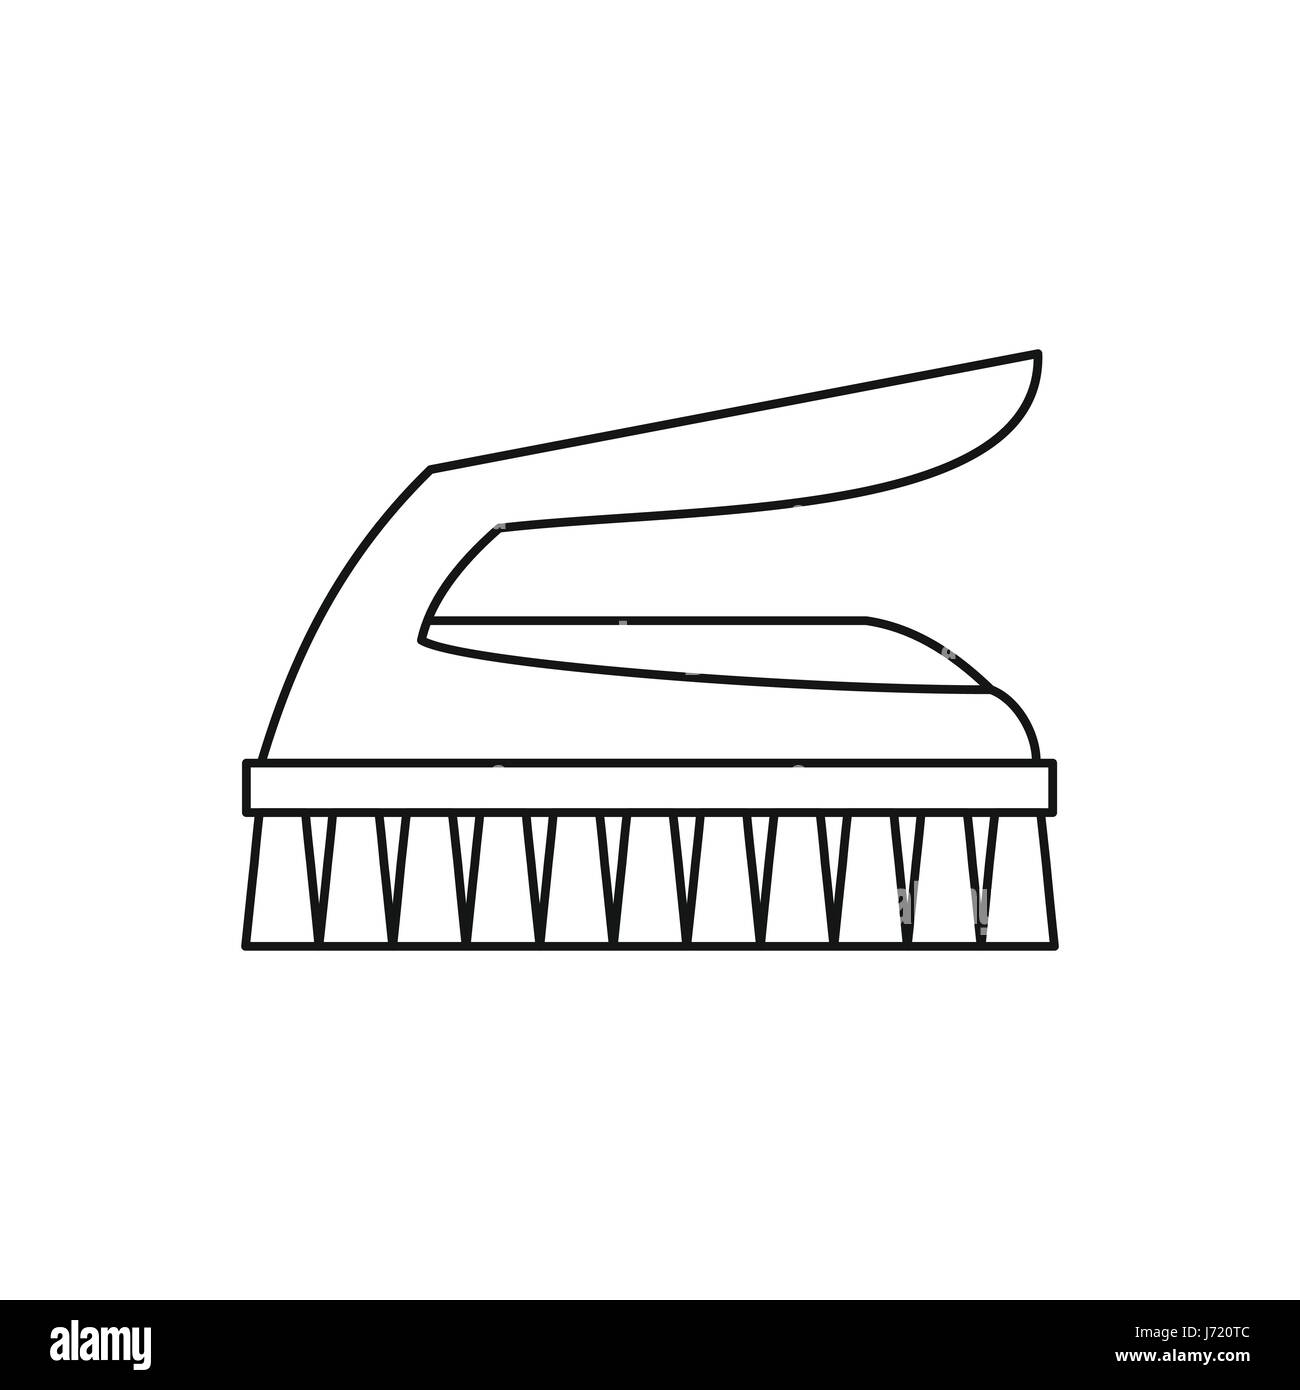 Cleaning Brush Thin Line Icon Stock Illustration - Download Image Now -  Bristle - Animal Part, Care, Chores - iStock